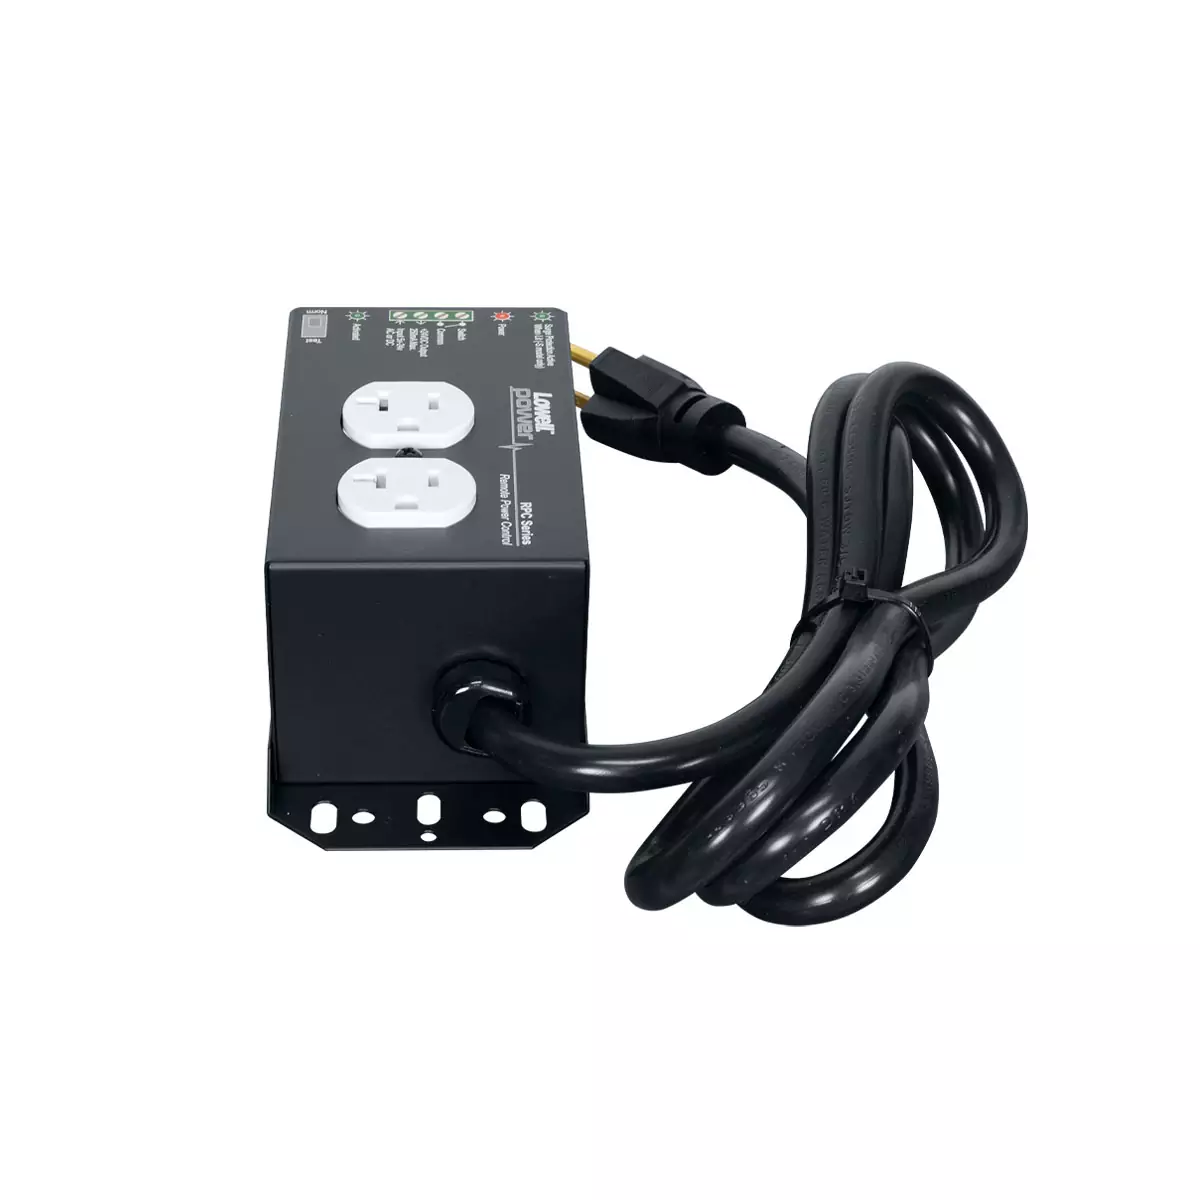 Lowell RPC 20 CD Remote Power Control